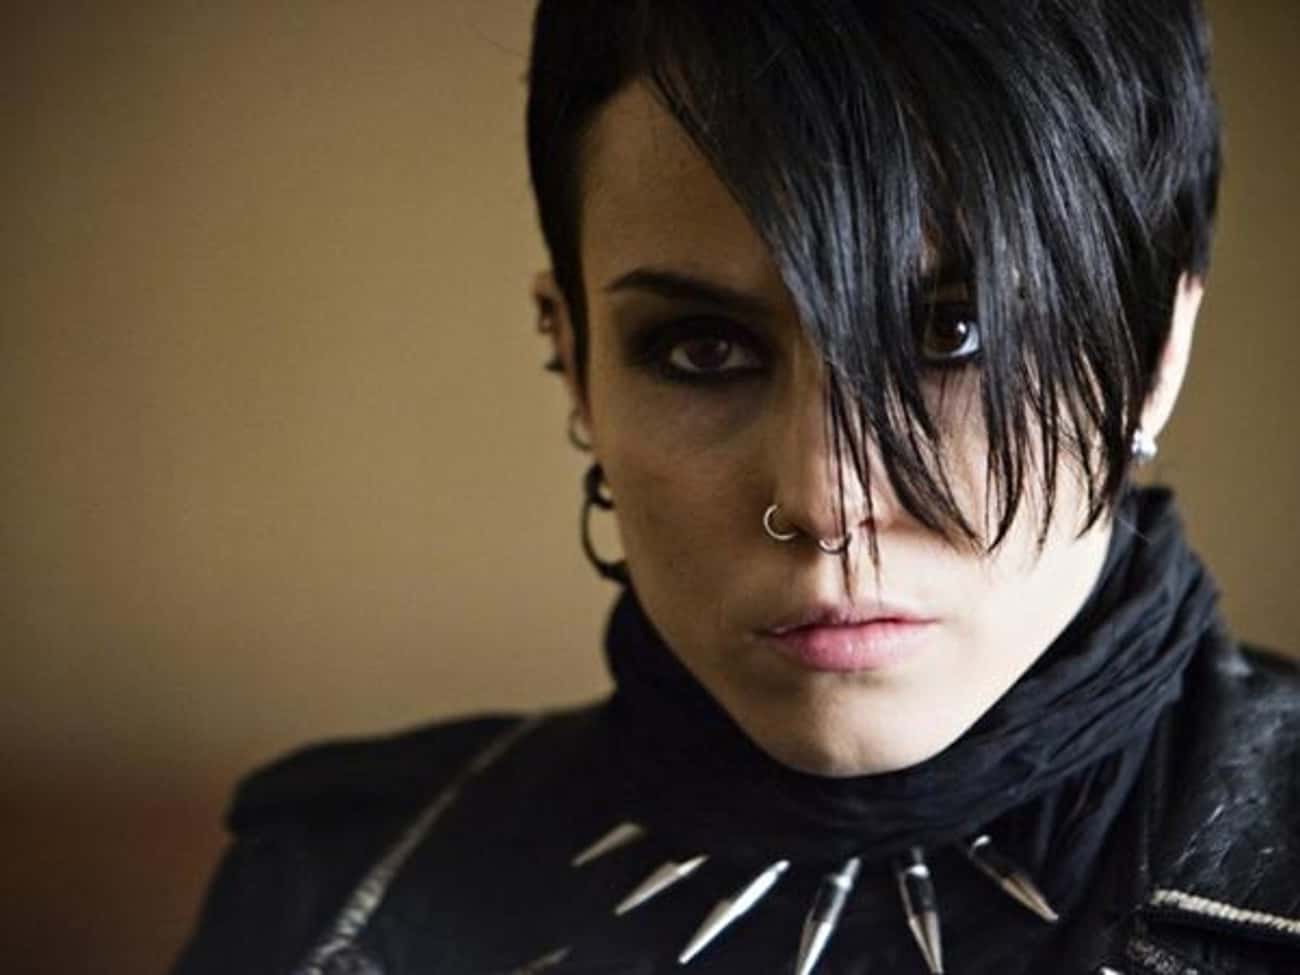 Aries (March 21 - April 19): Lisbeth Salander From 'The Girl With The Dragon Tattoo' 